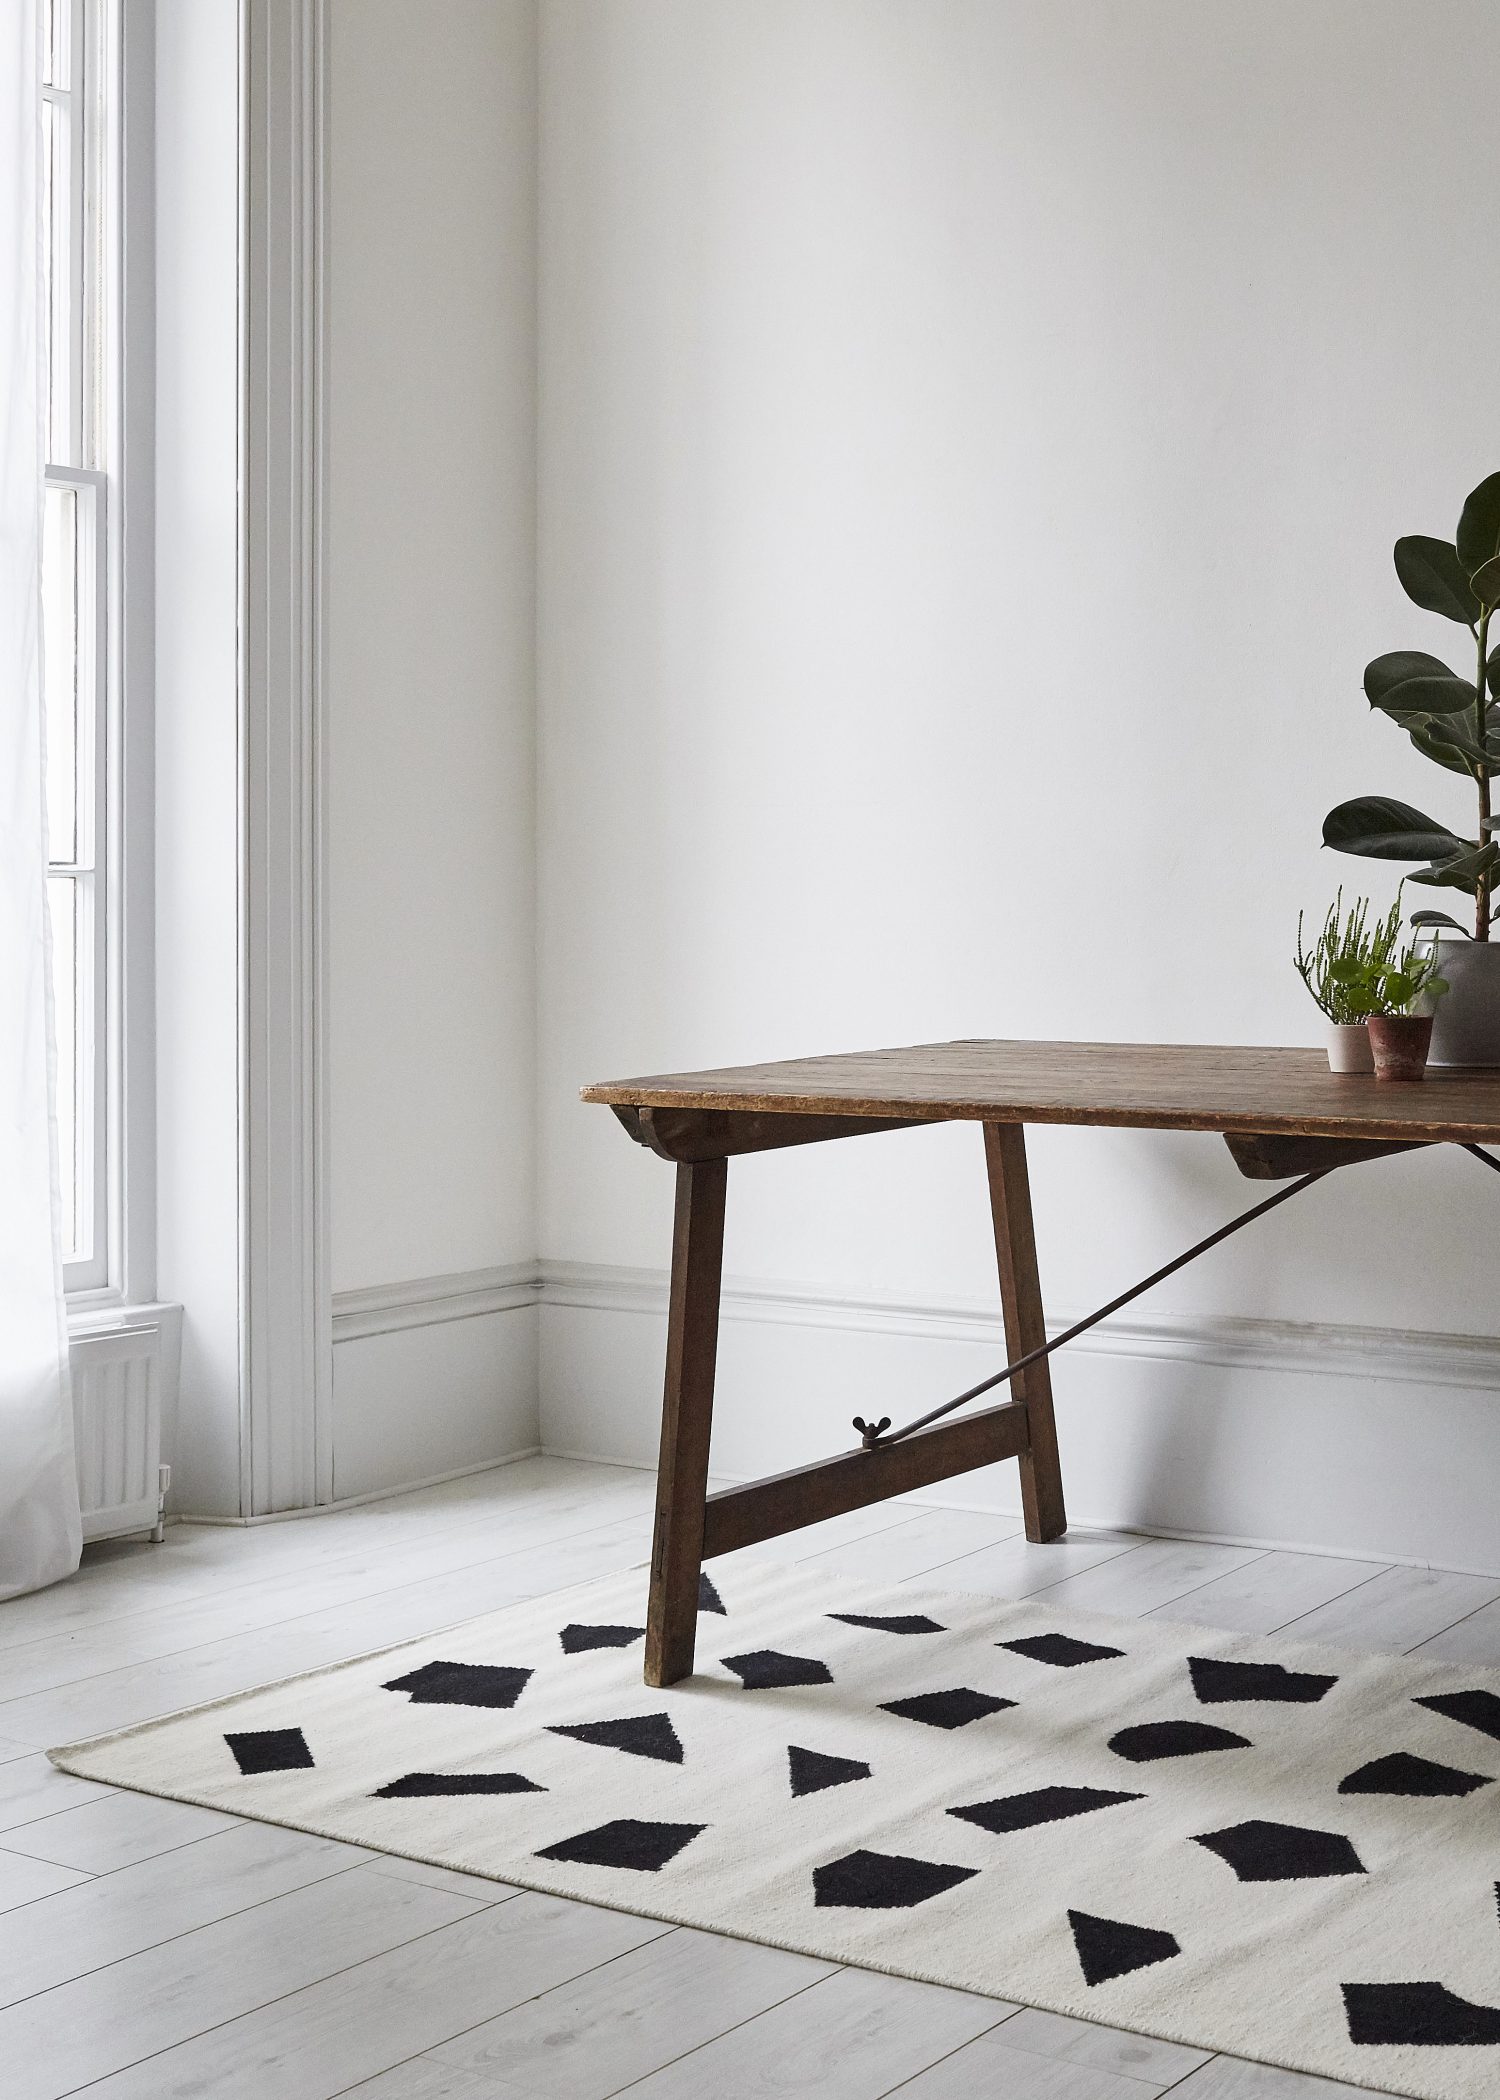 Unusual shapes and high-contrast define this modern kilim